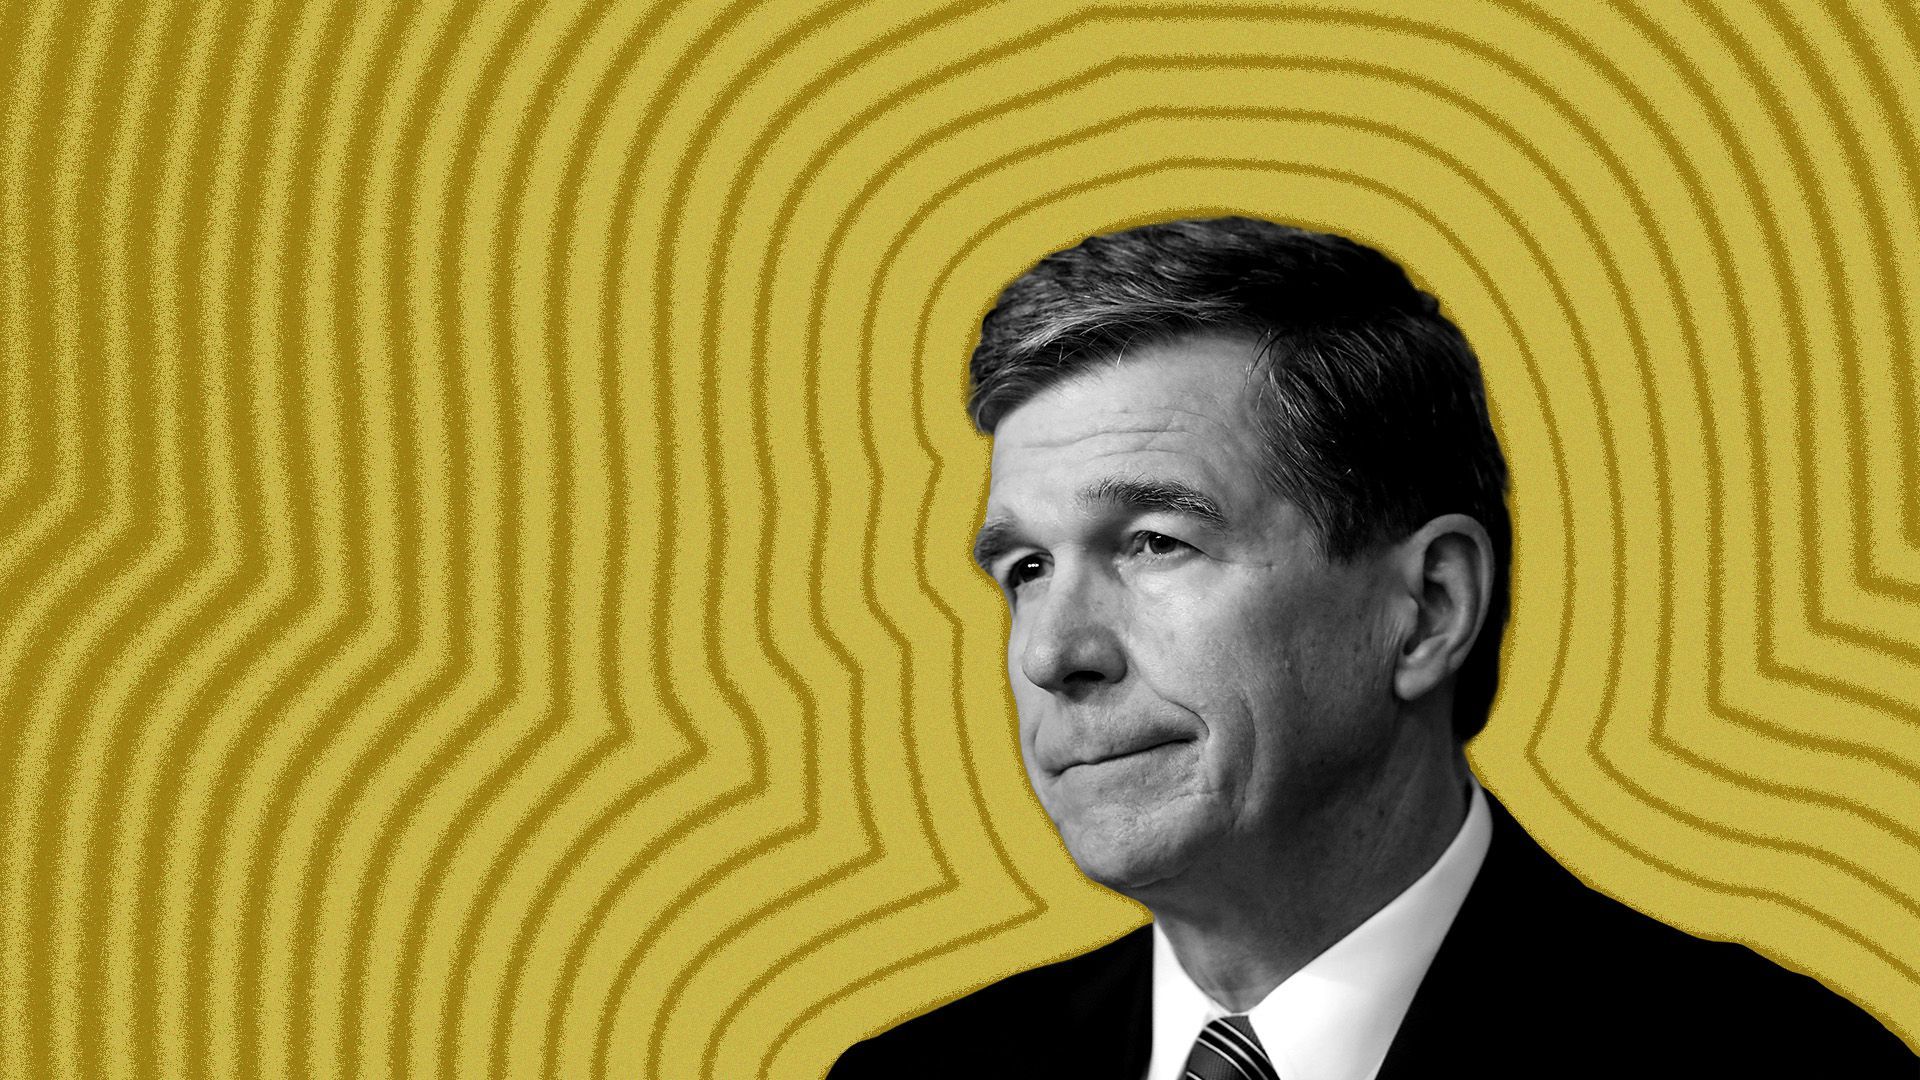 Photo illustration of North Carolina Governor Roy Cooper with lines radiating from him.